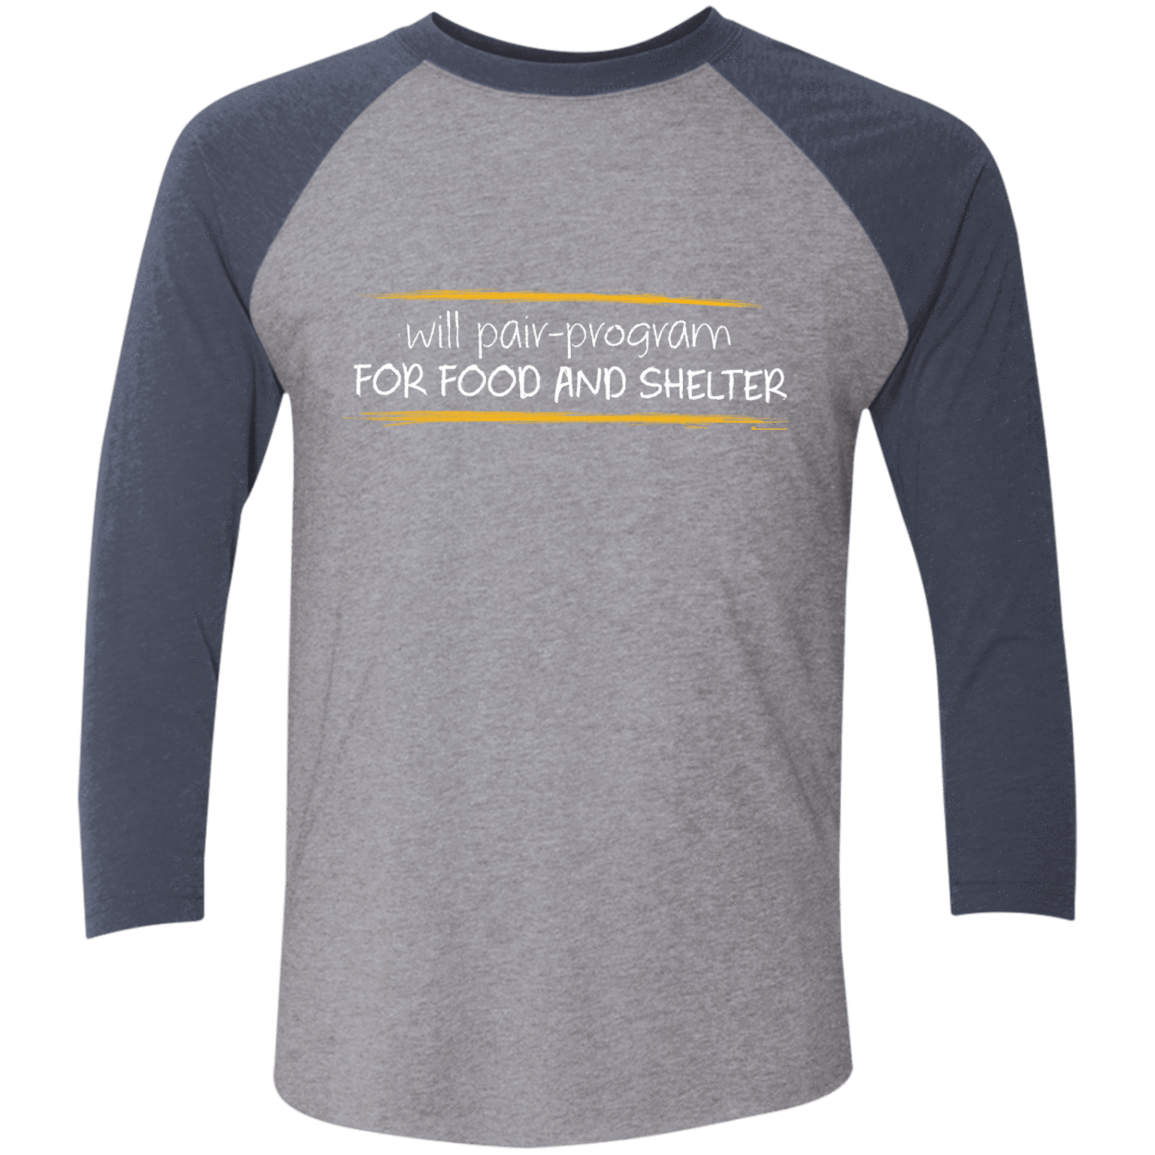 T-Shirts Premium Heather/Vintage Navy / X-Small Pair Programming For Food And Shelter Men's Triblend 3/4 Sleeve